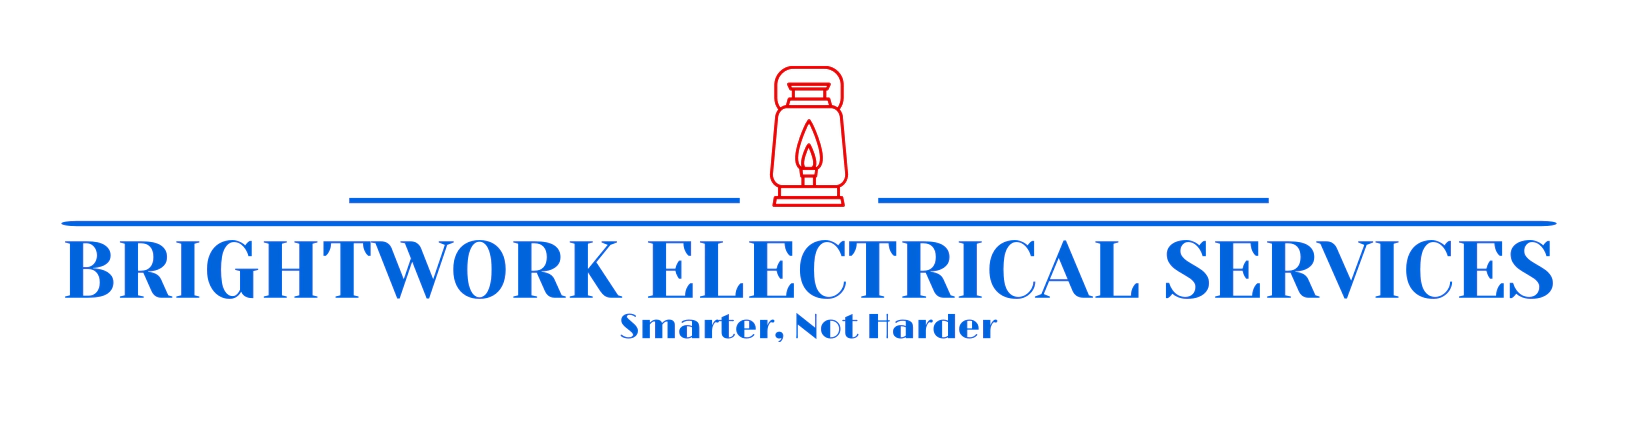 brightwork electrical services high resolution color logo 1